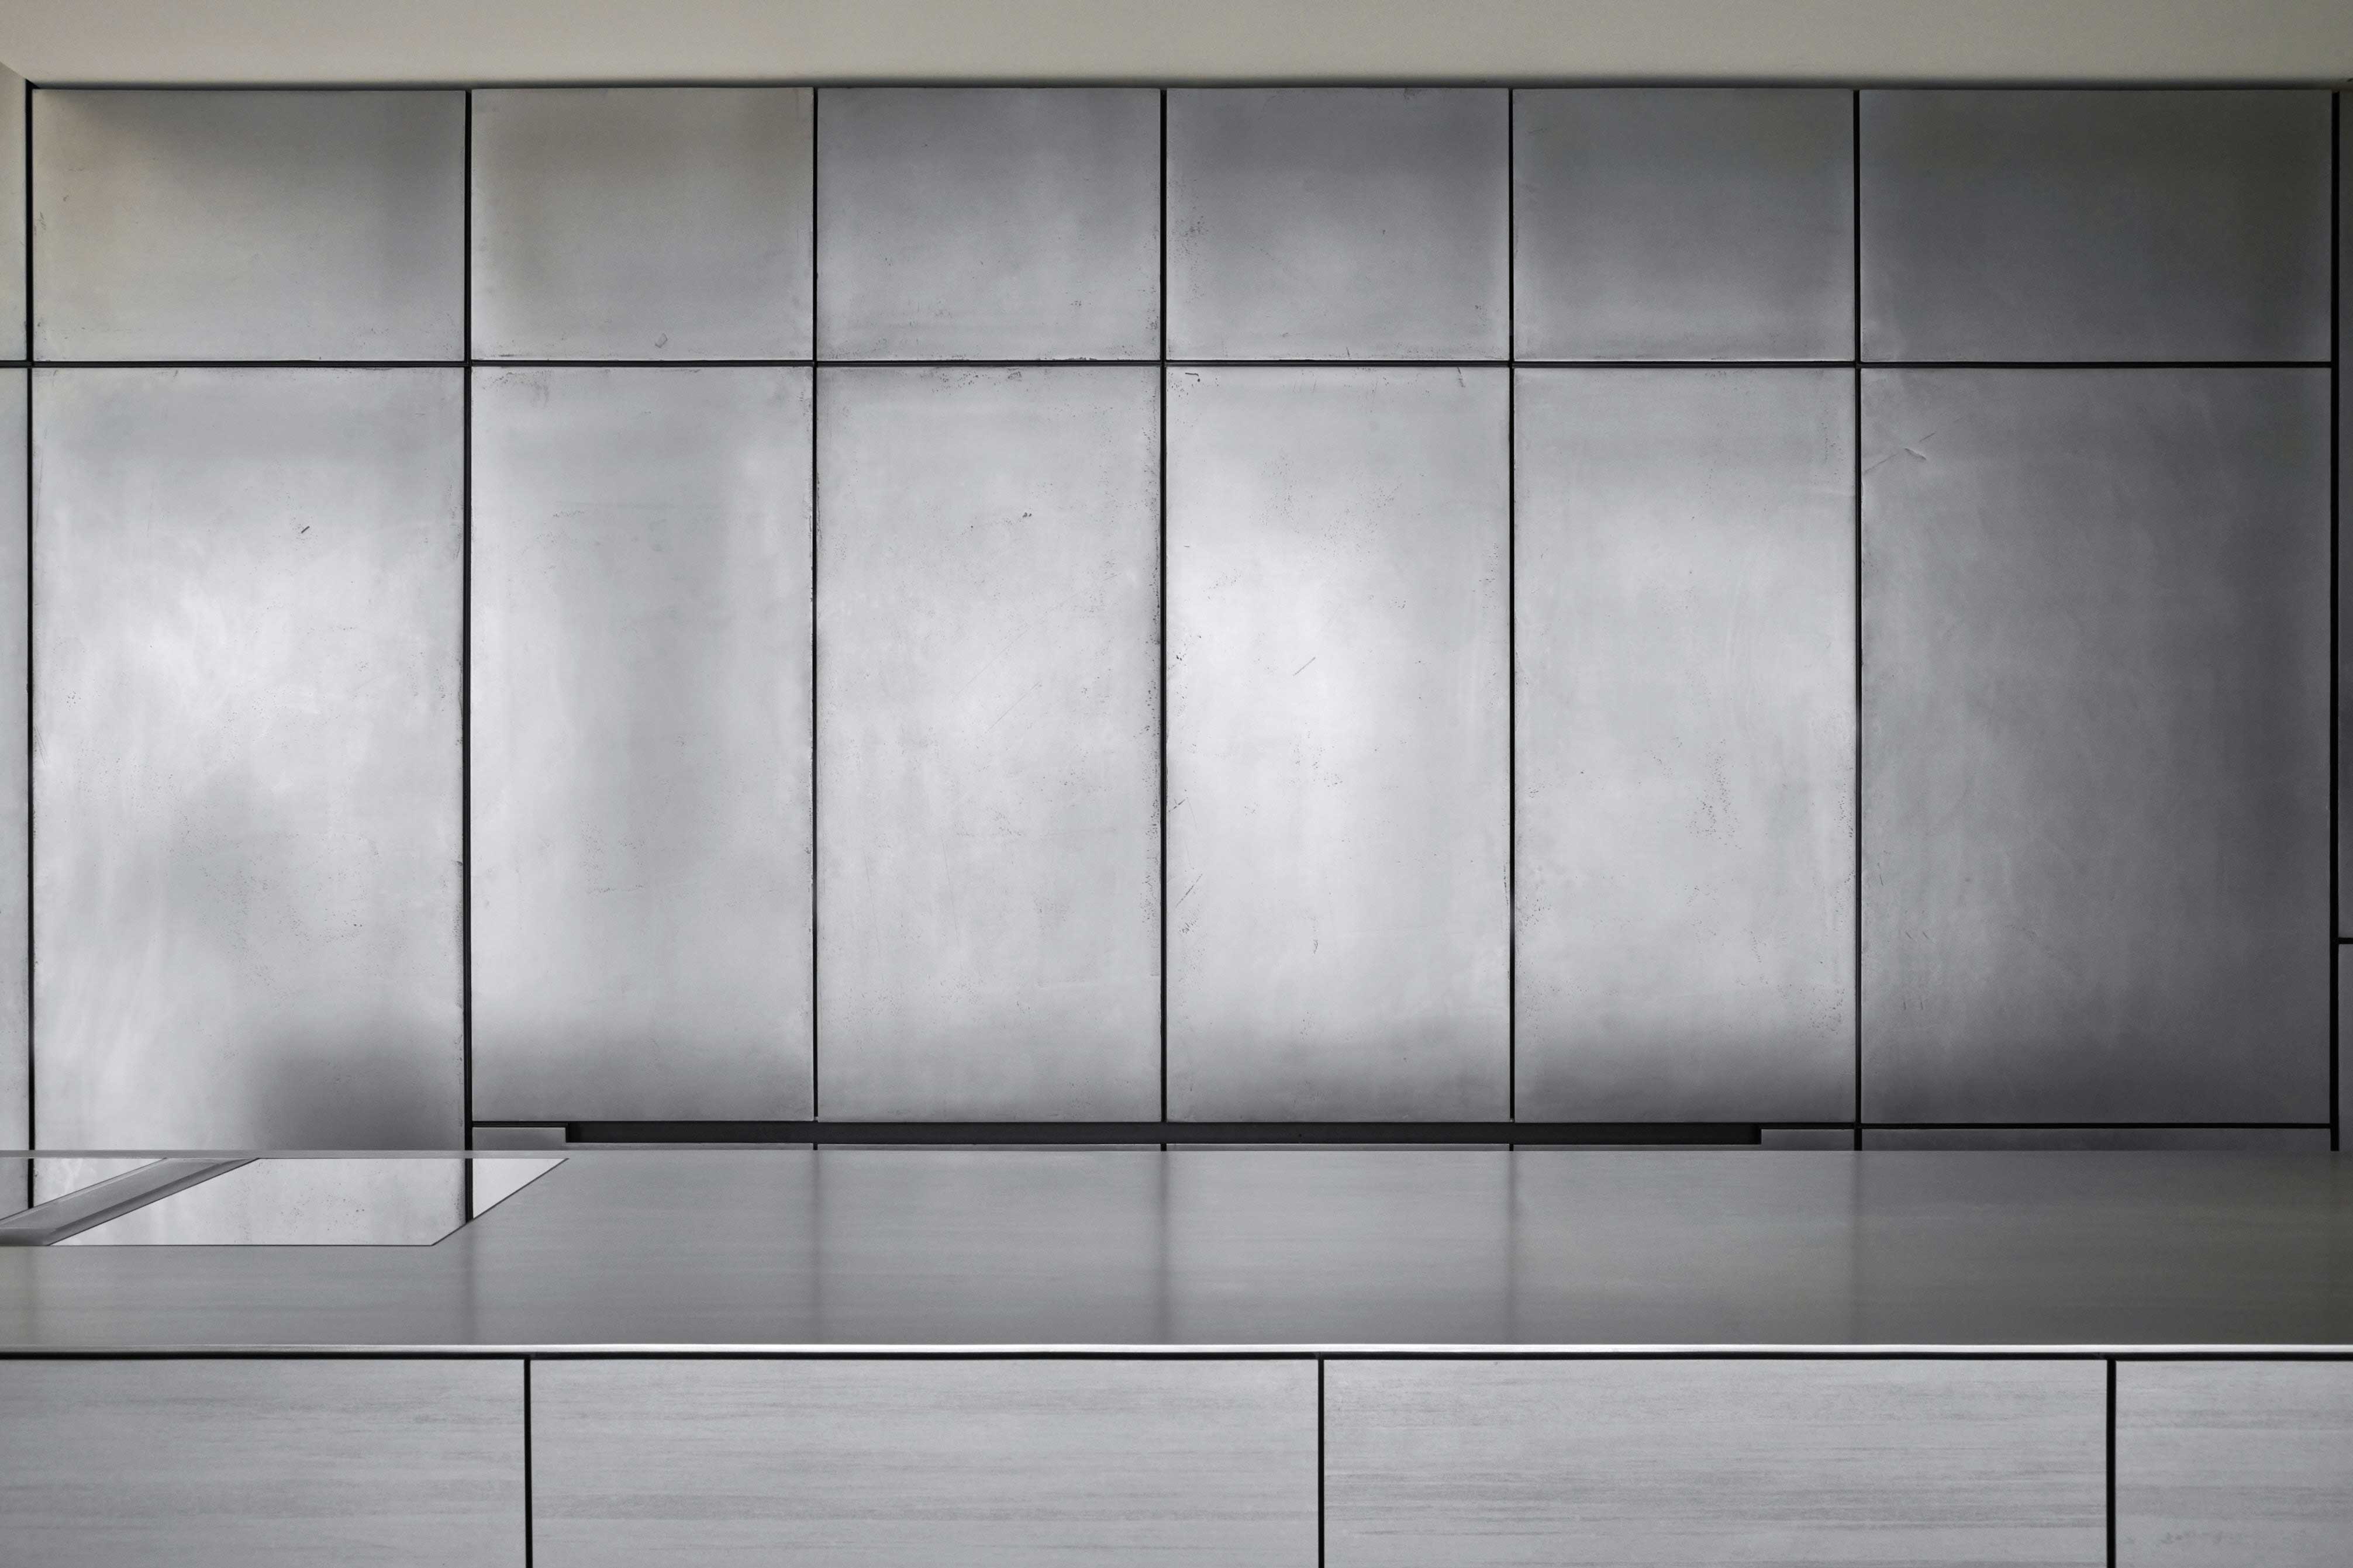 Bora Private Penthouse Residential Interior Design Stainless Steel kitchen counter knoll high end baxter